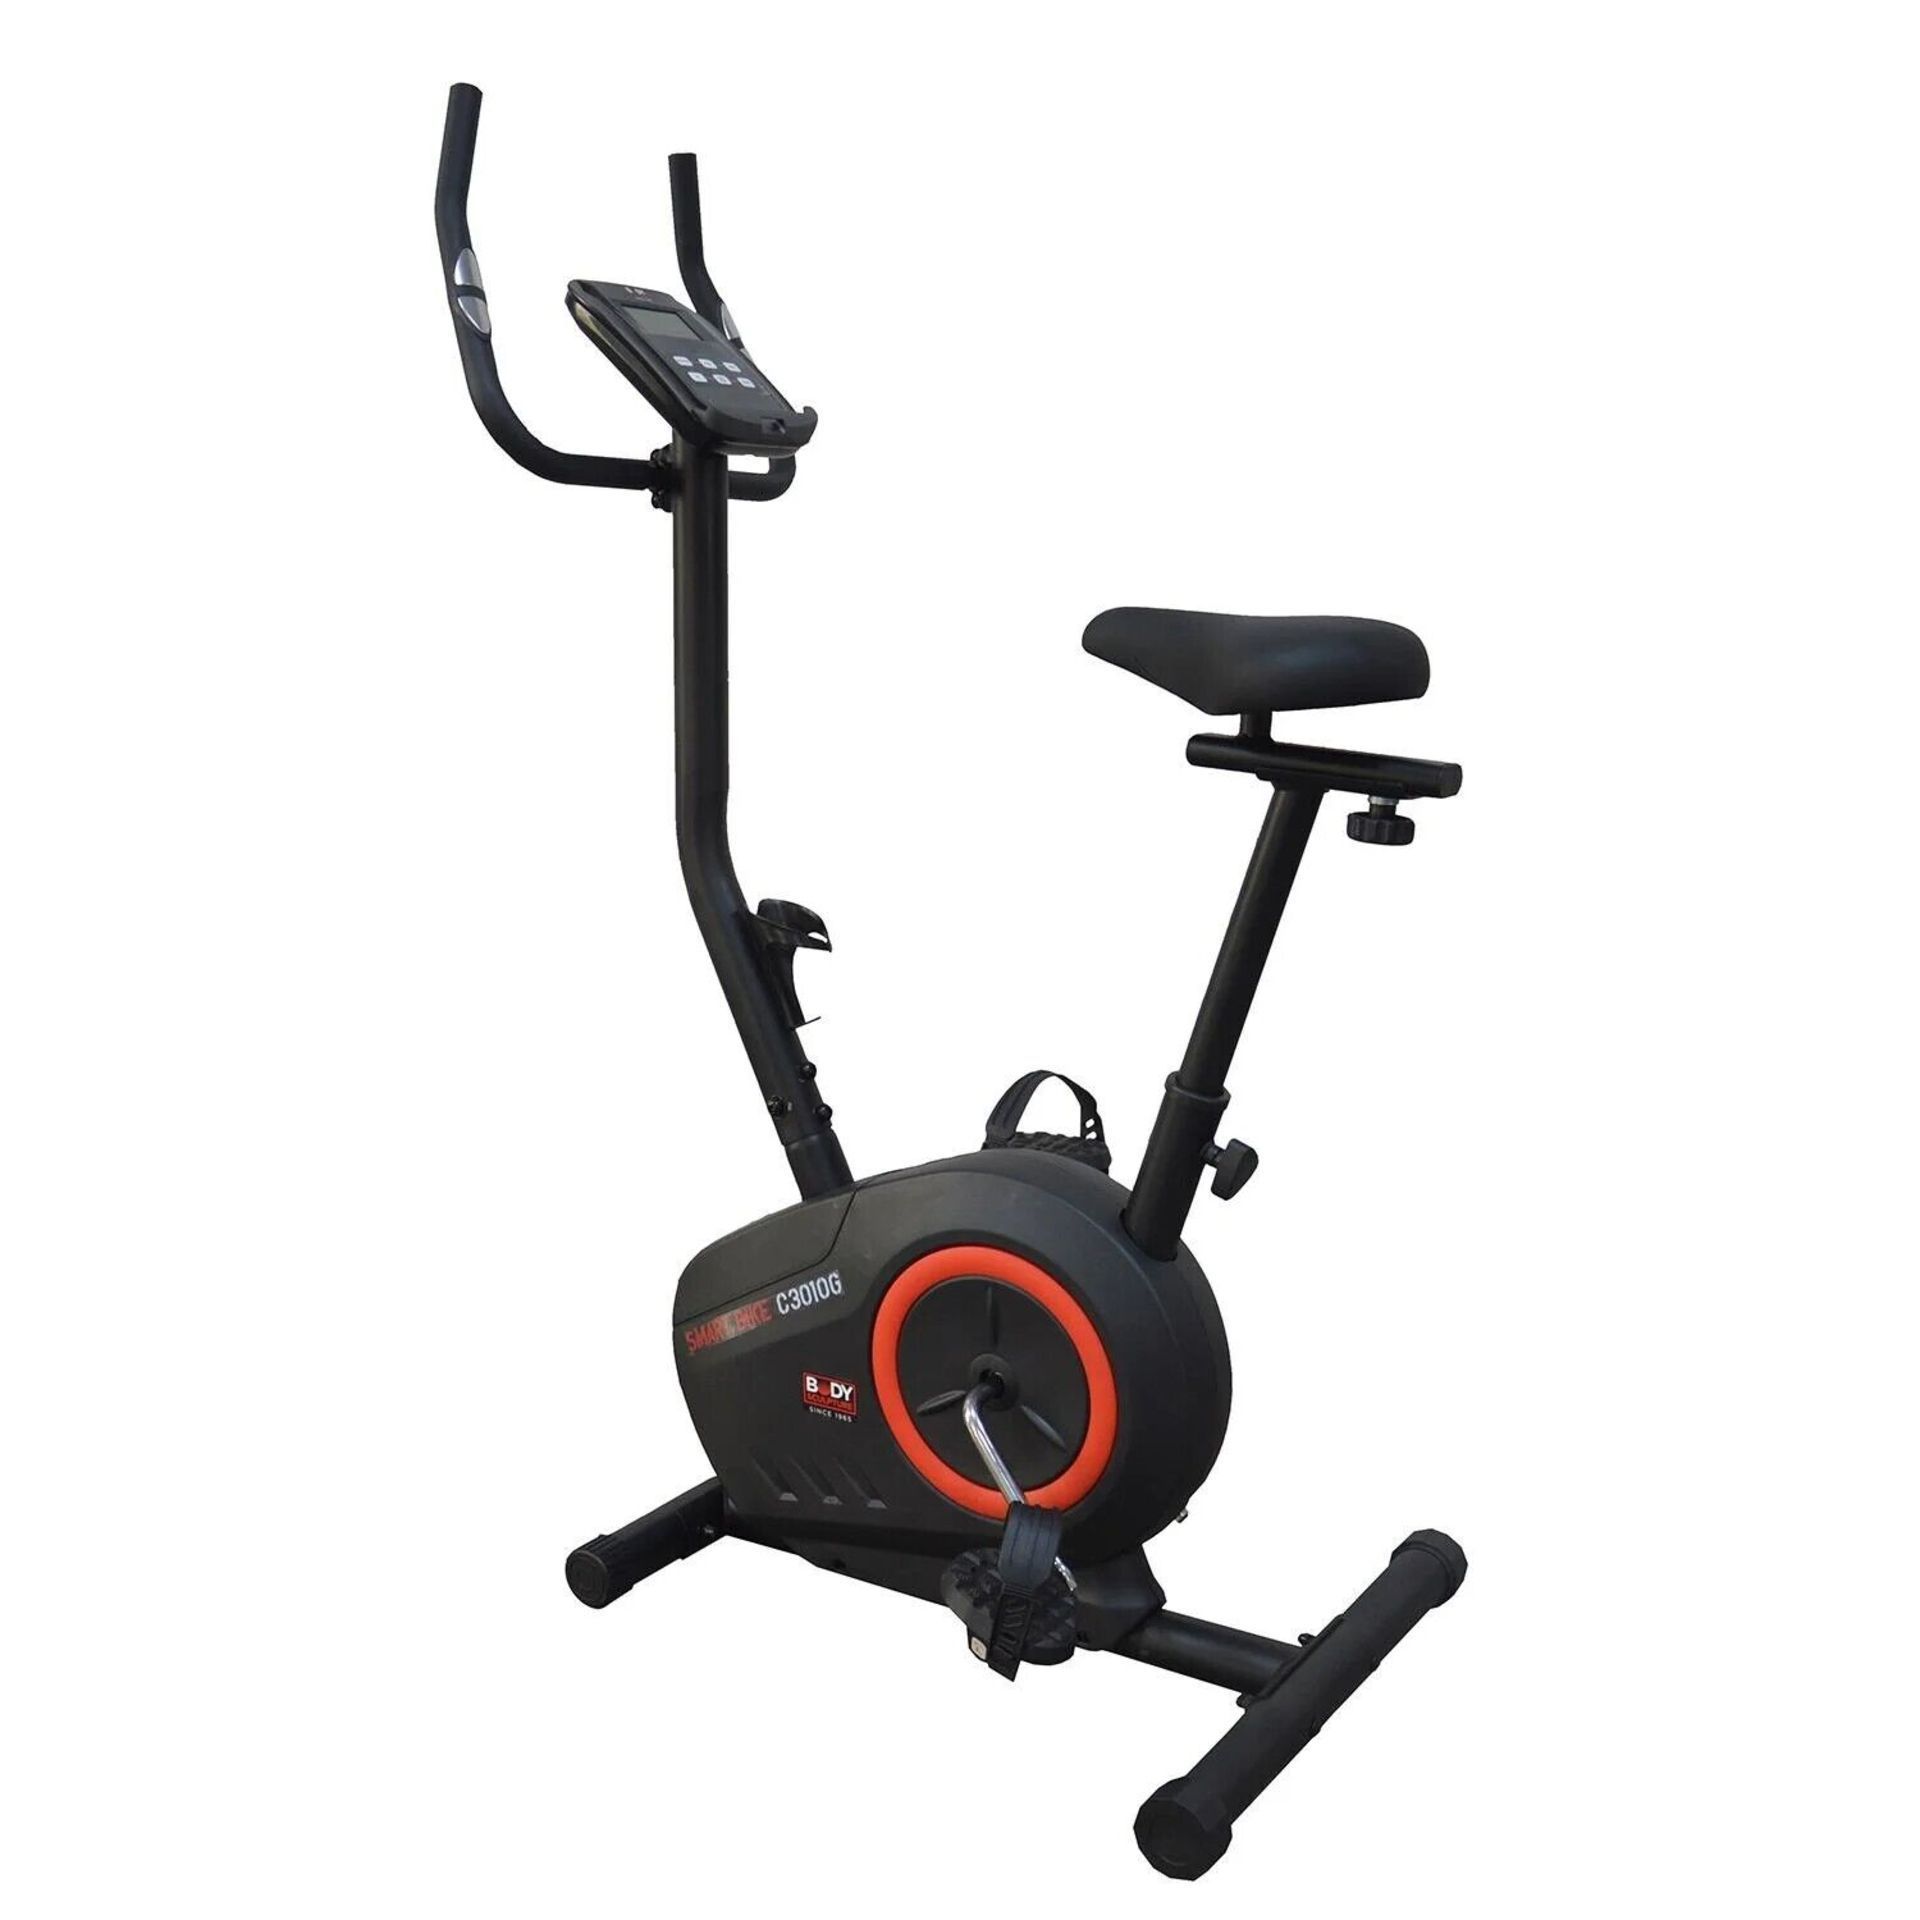 New & Boxed Body Sculpture Magnetic programmable Exercise Bike. RRP £360. Body Sculpture - Image 2 of 4